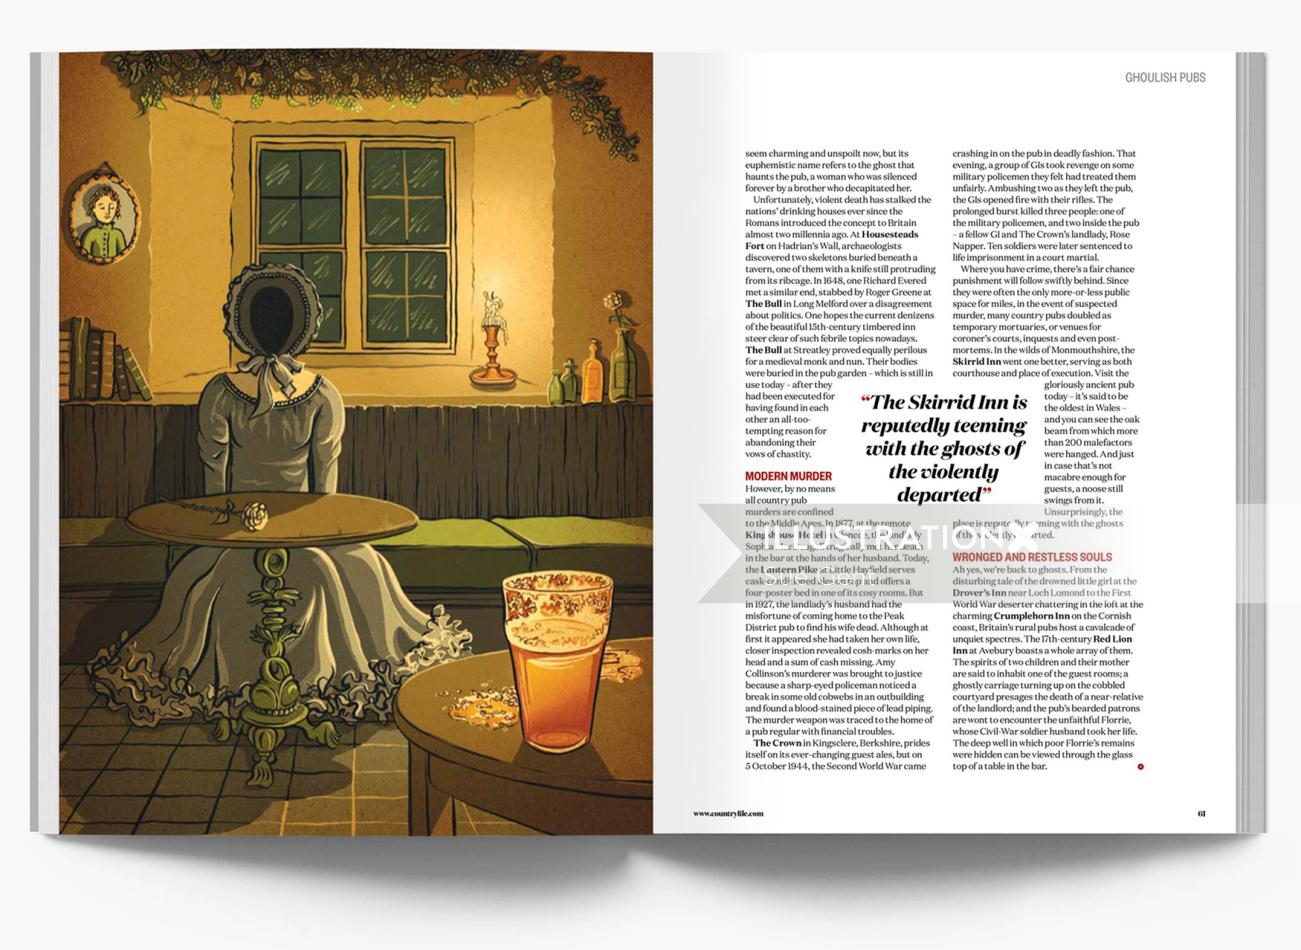 Editorial illustration of page design
